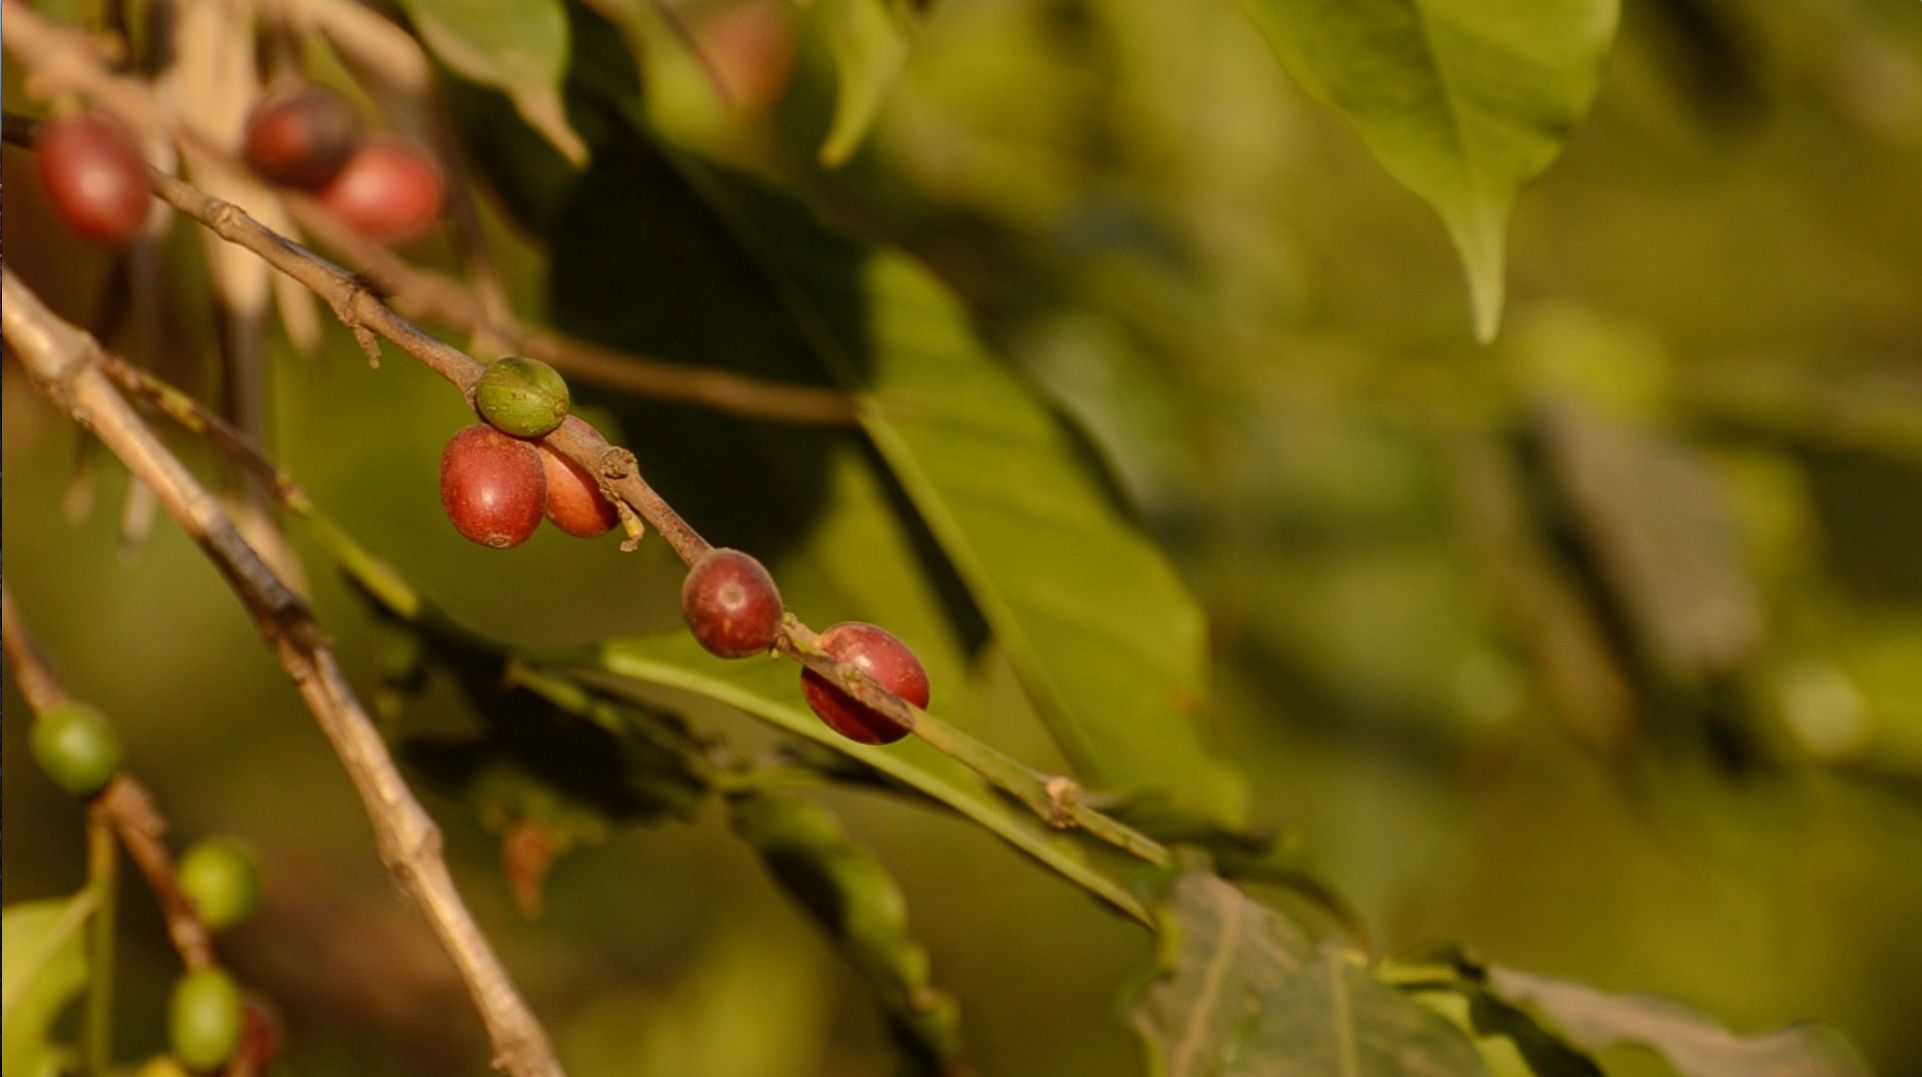 Cherries, the fruit of the coffee tree, generally contain two coffee beans--actually two seeds, each with one flat side--inside. Tanzania is famous for its peaberry coffee, produced by a rare mutation that creates only a single seed with no flat part. Image by Dan Grossman. Tanzania, 2016.